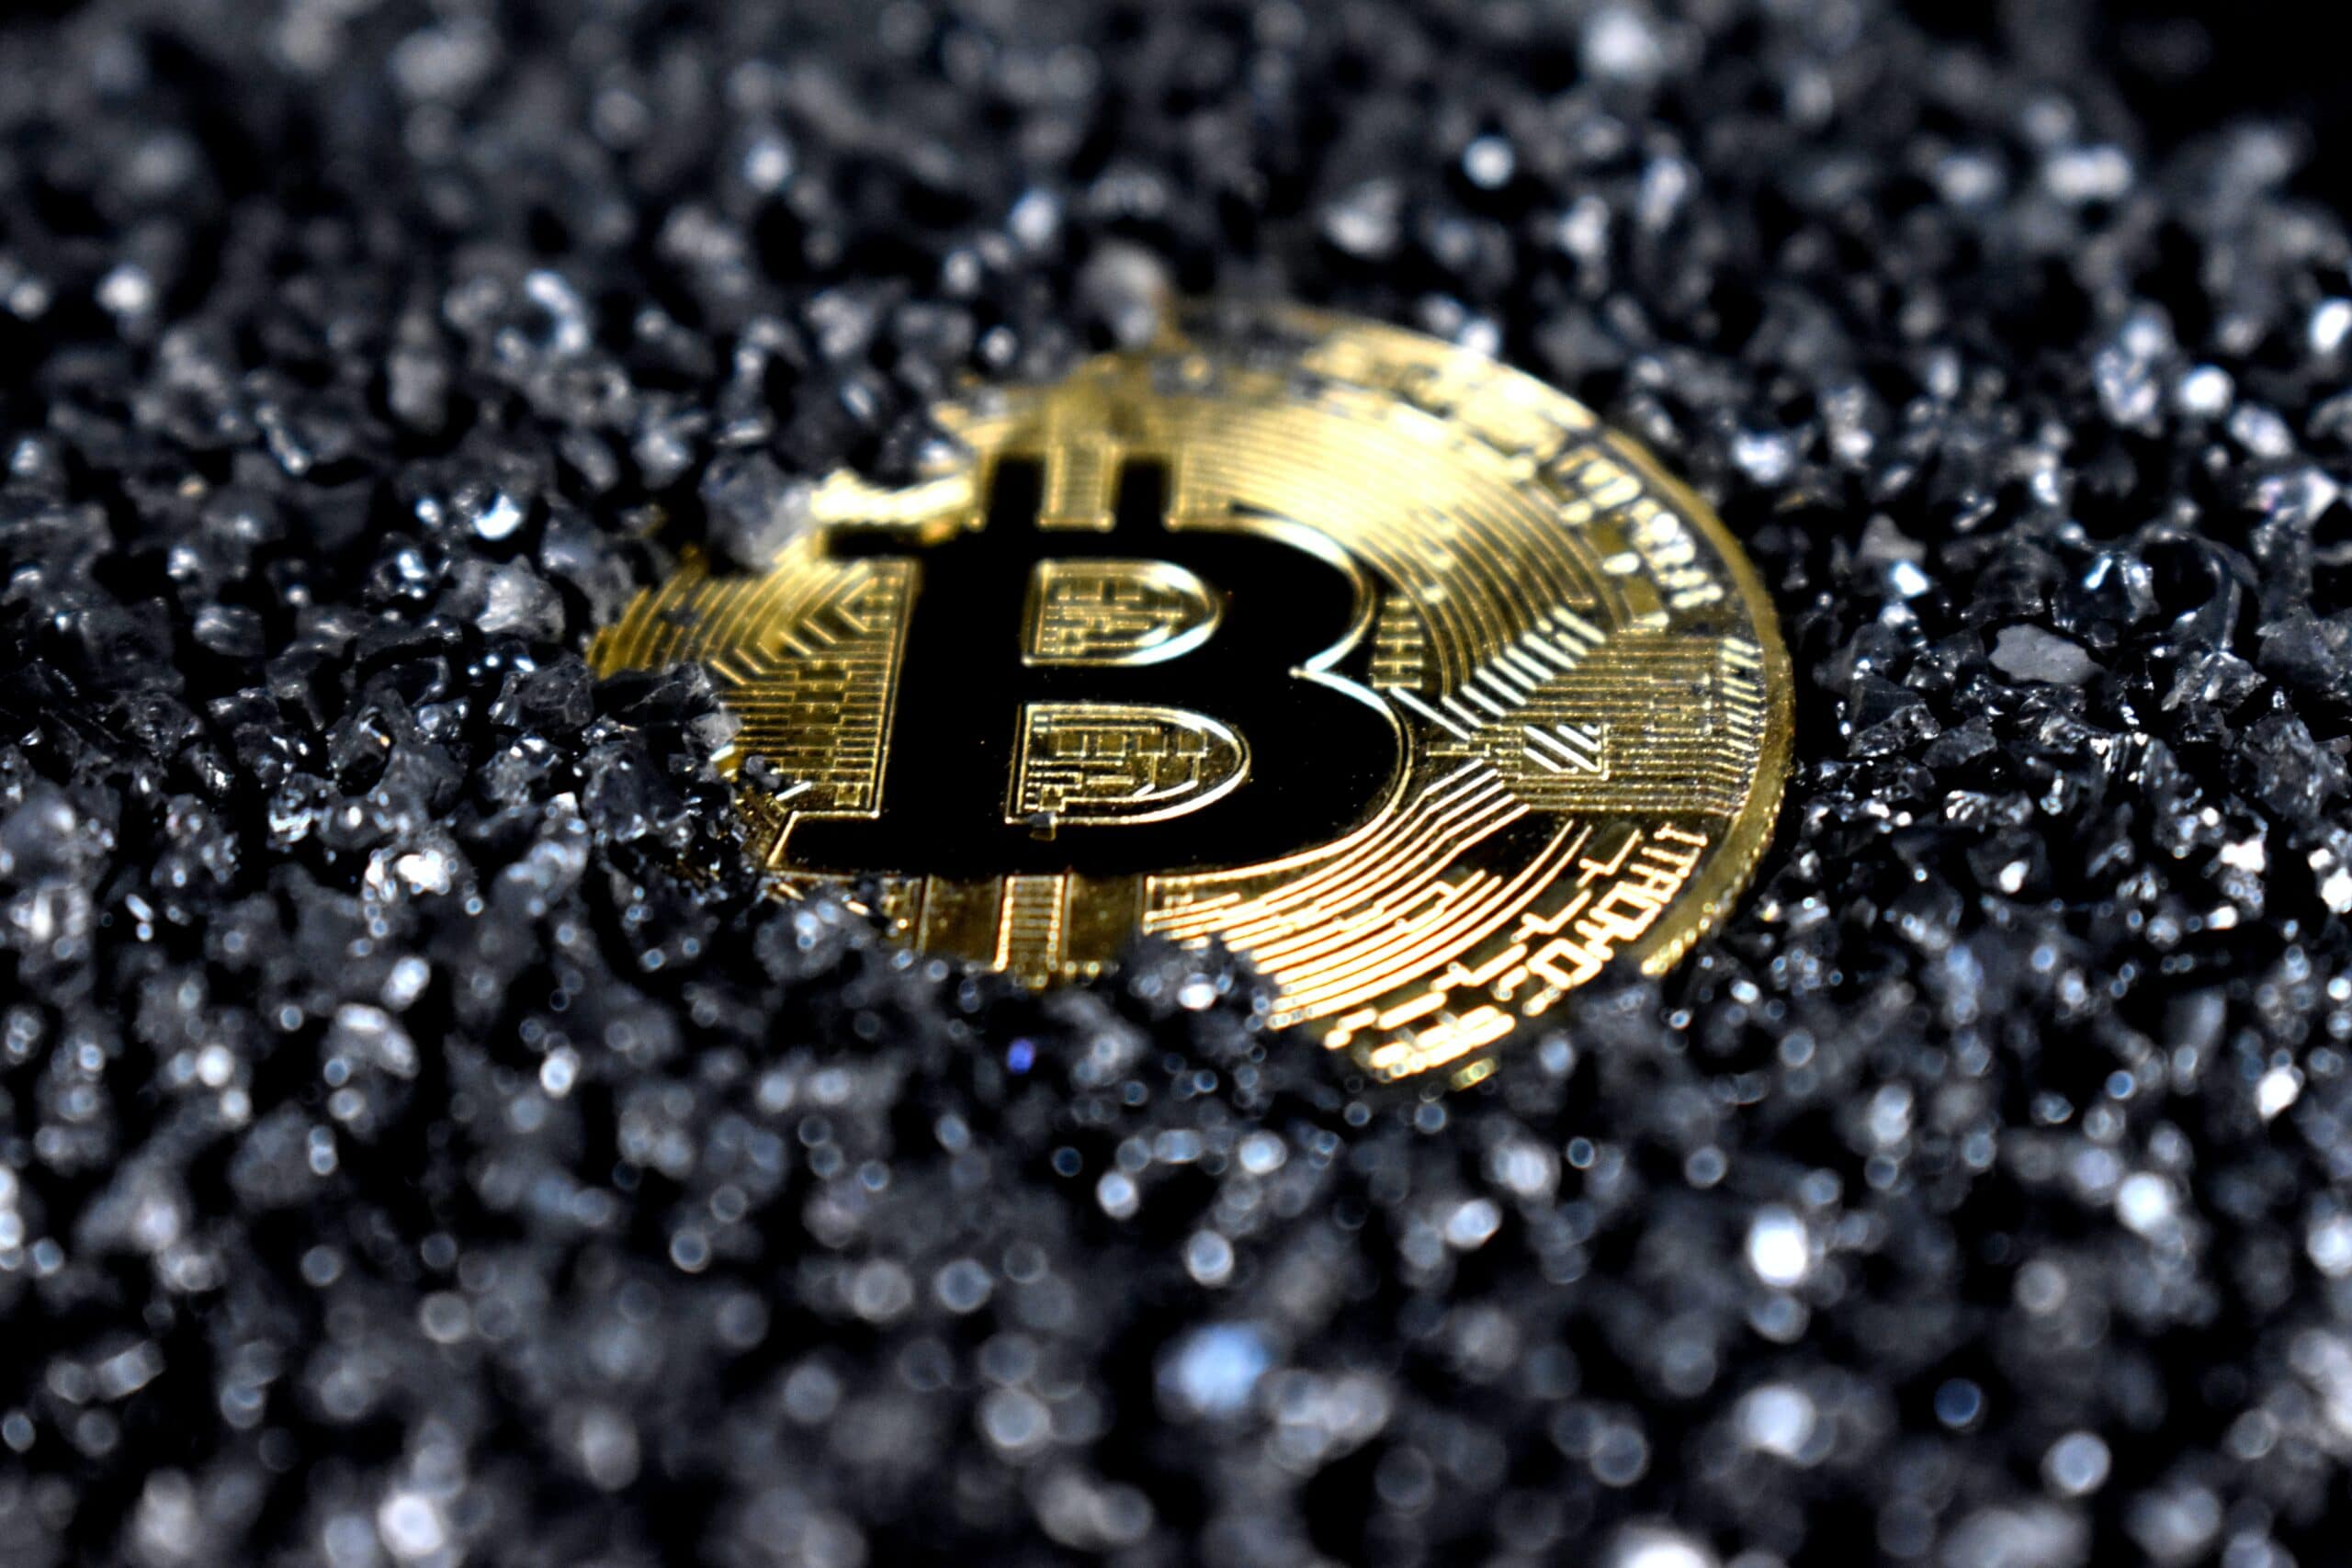 Willy Woo On Bitcoin: BTC Could Become A $20 Trillion Asset